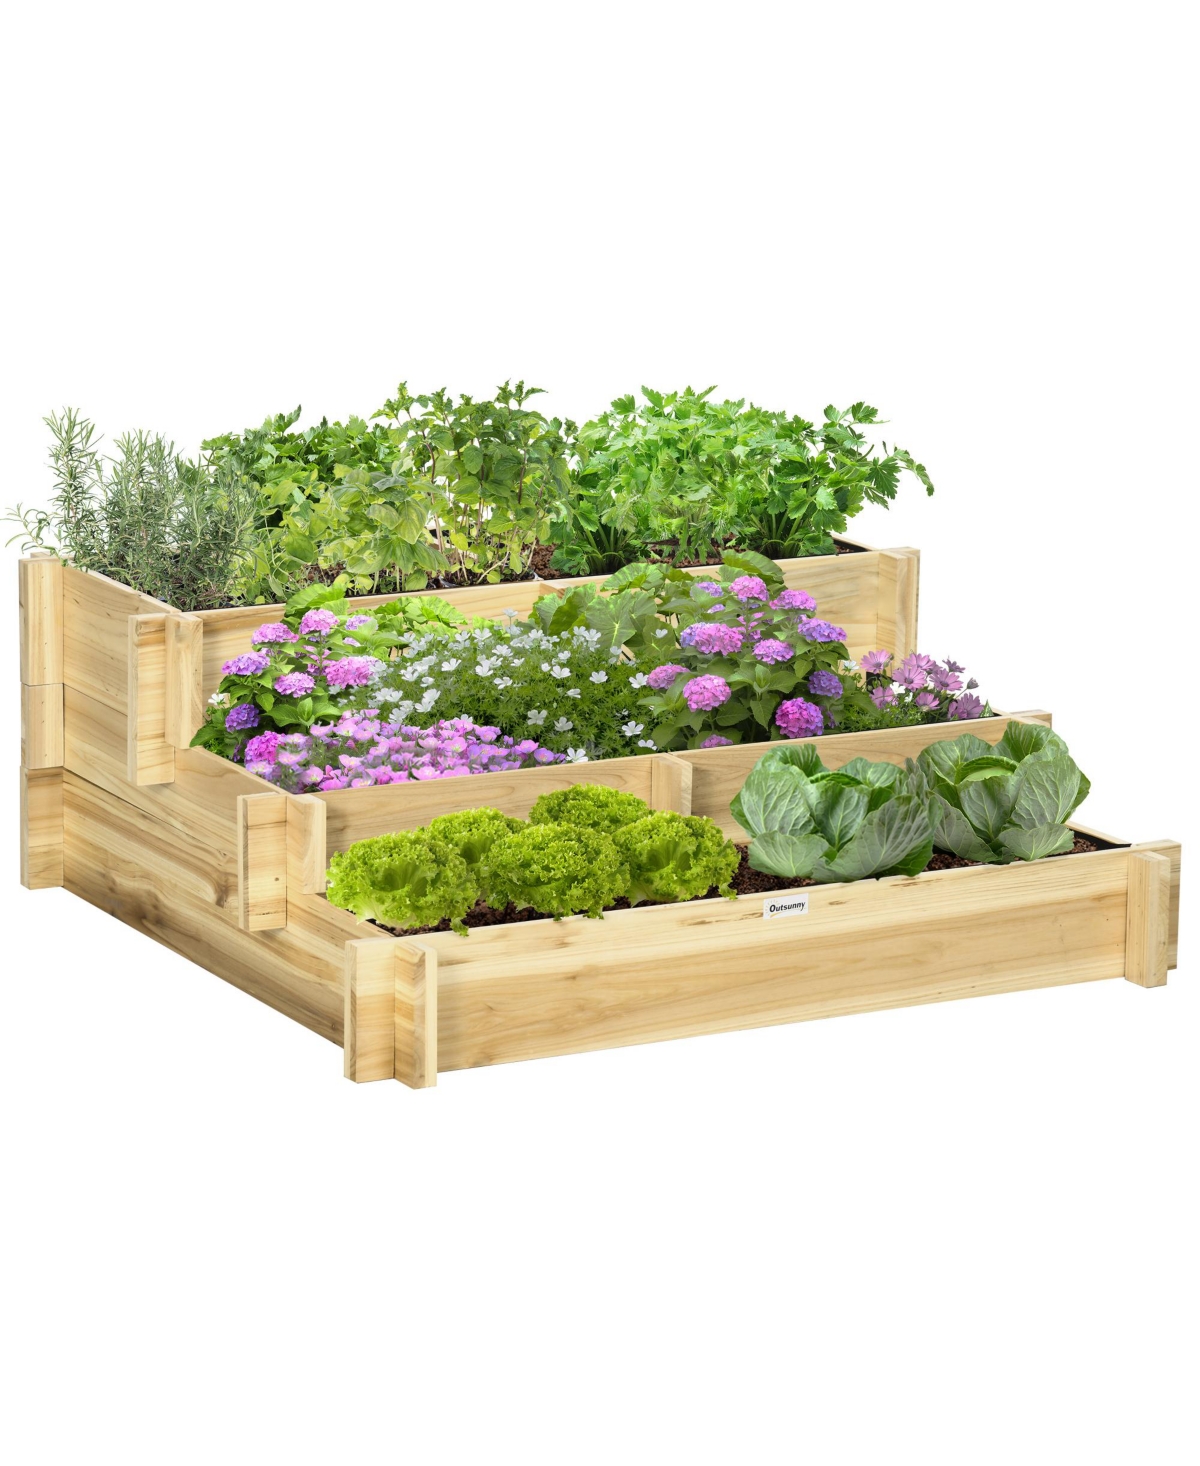 3-Tier Raised Garden Bed, Water Draining Fabric for Soil, Elevated Wood Flower Box for Vegetables, Herbs, Outdoor Plants, Natural - Natural w